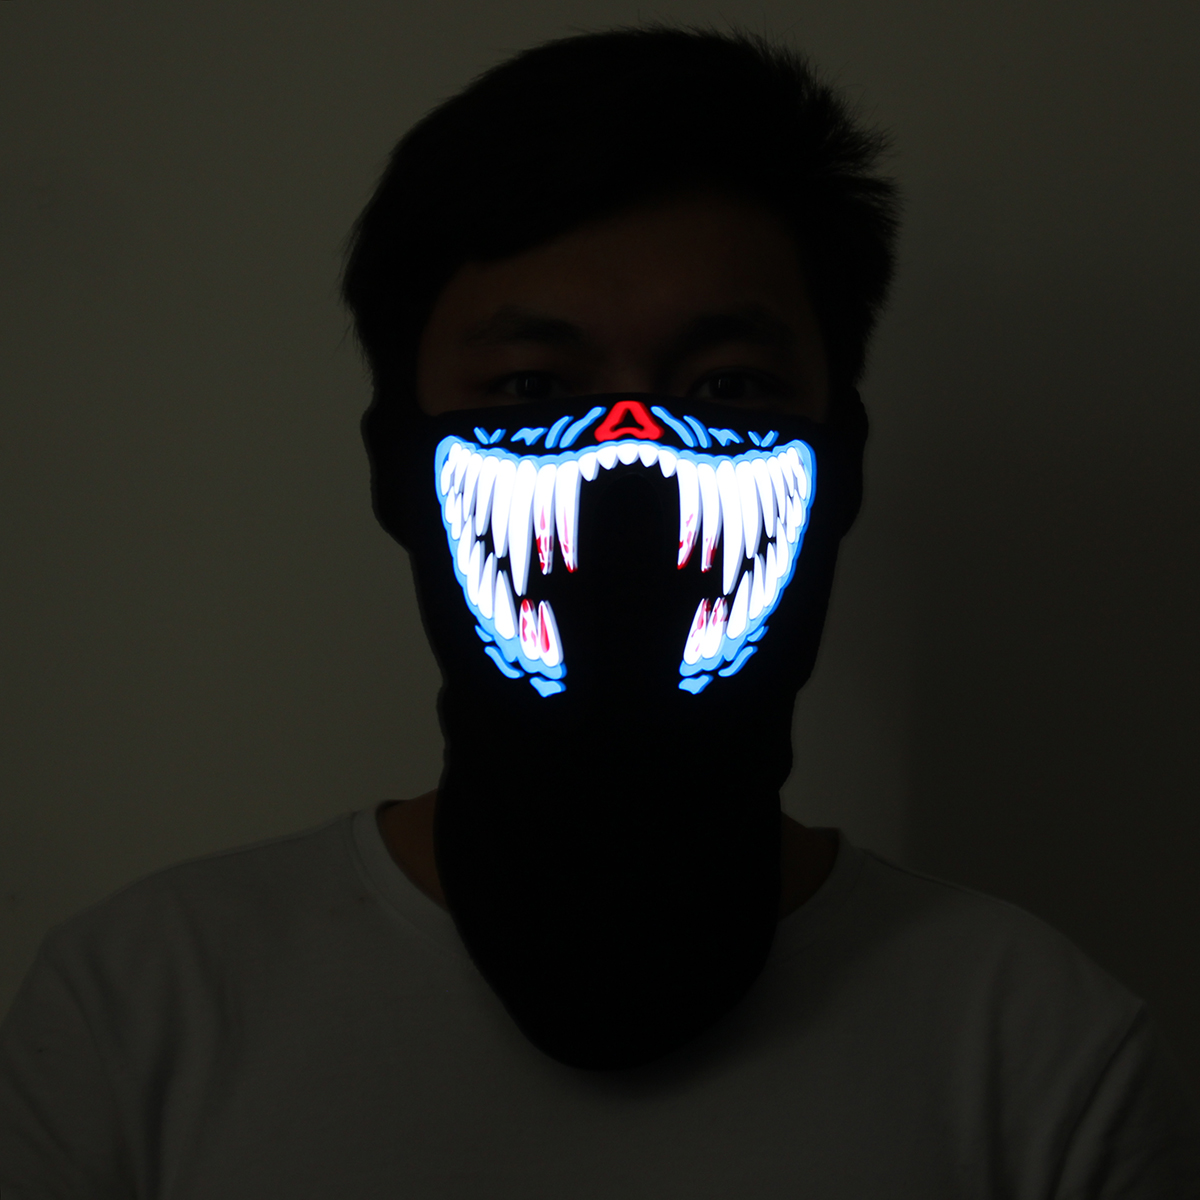 LED-Rave-Party-Face-Mask-Equalizer-Flashing-by-Music-Luminous-Cosplay-Dance-1332768-1